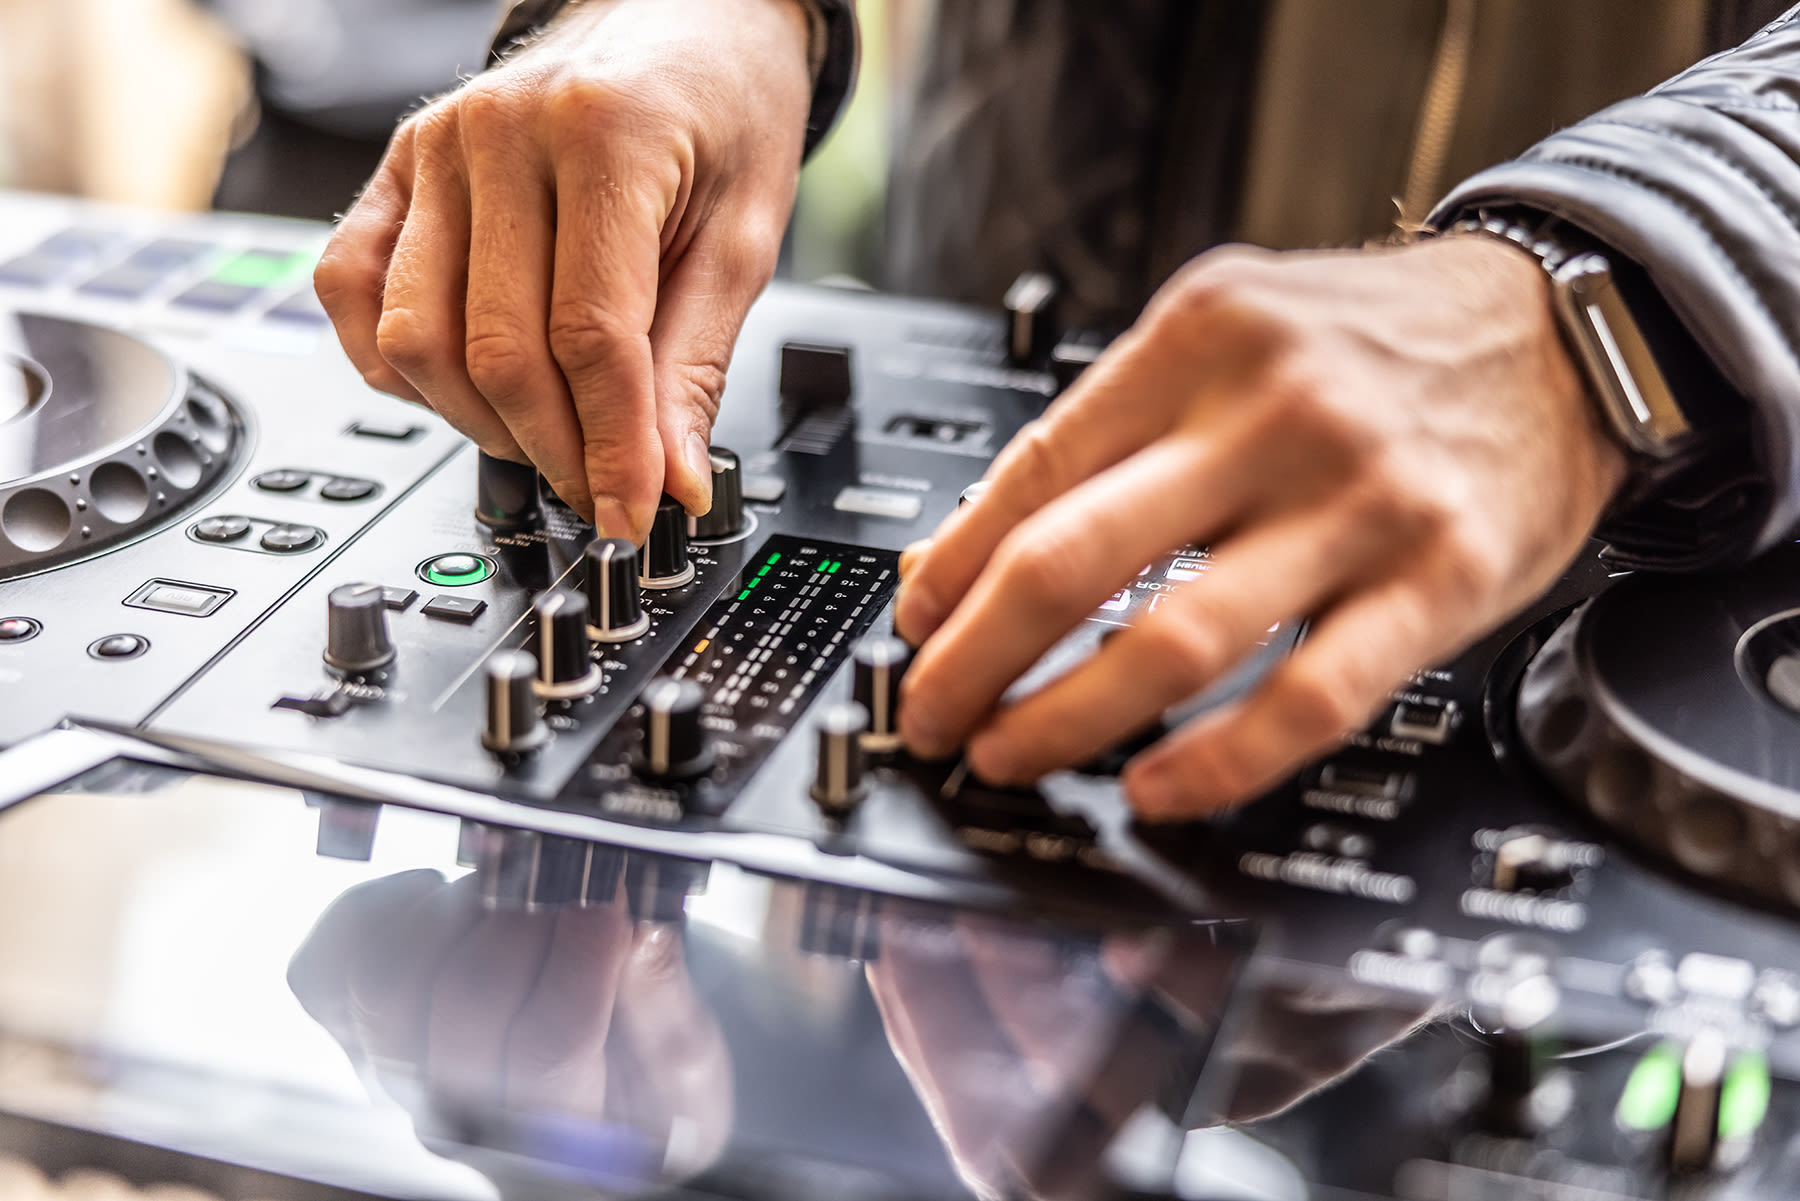 The Best DJ Gear for Beginners, According to a Pro